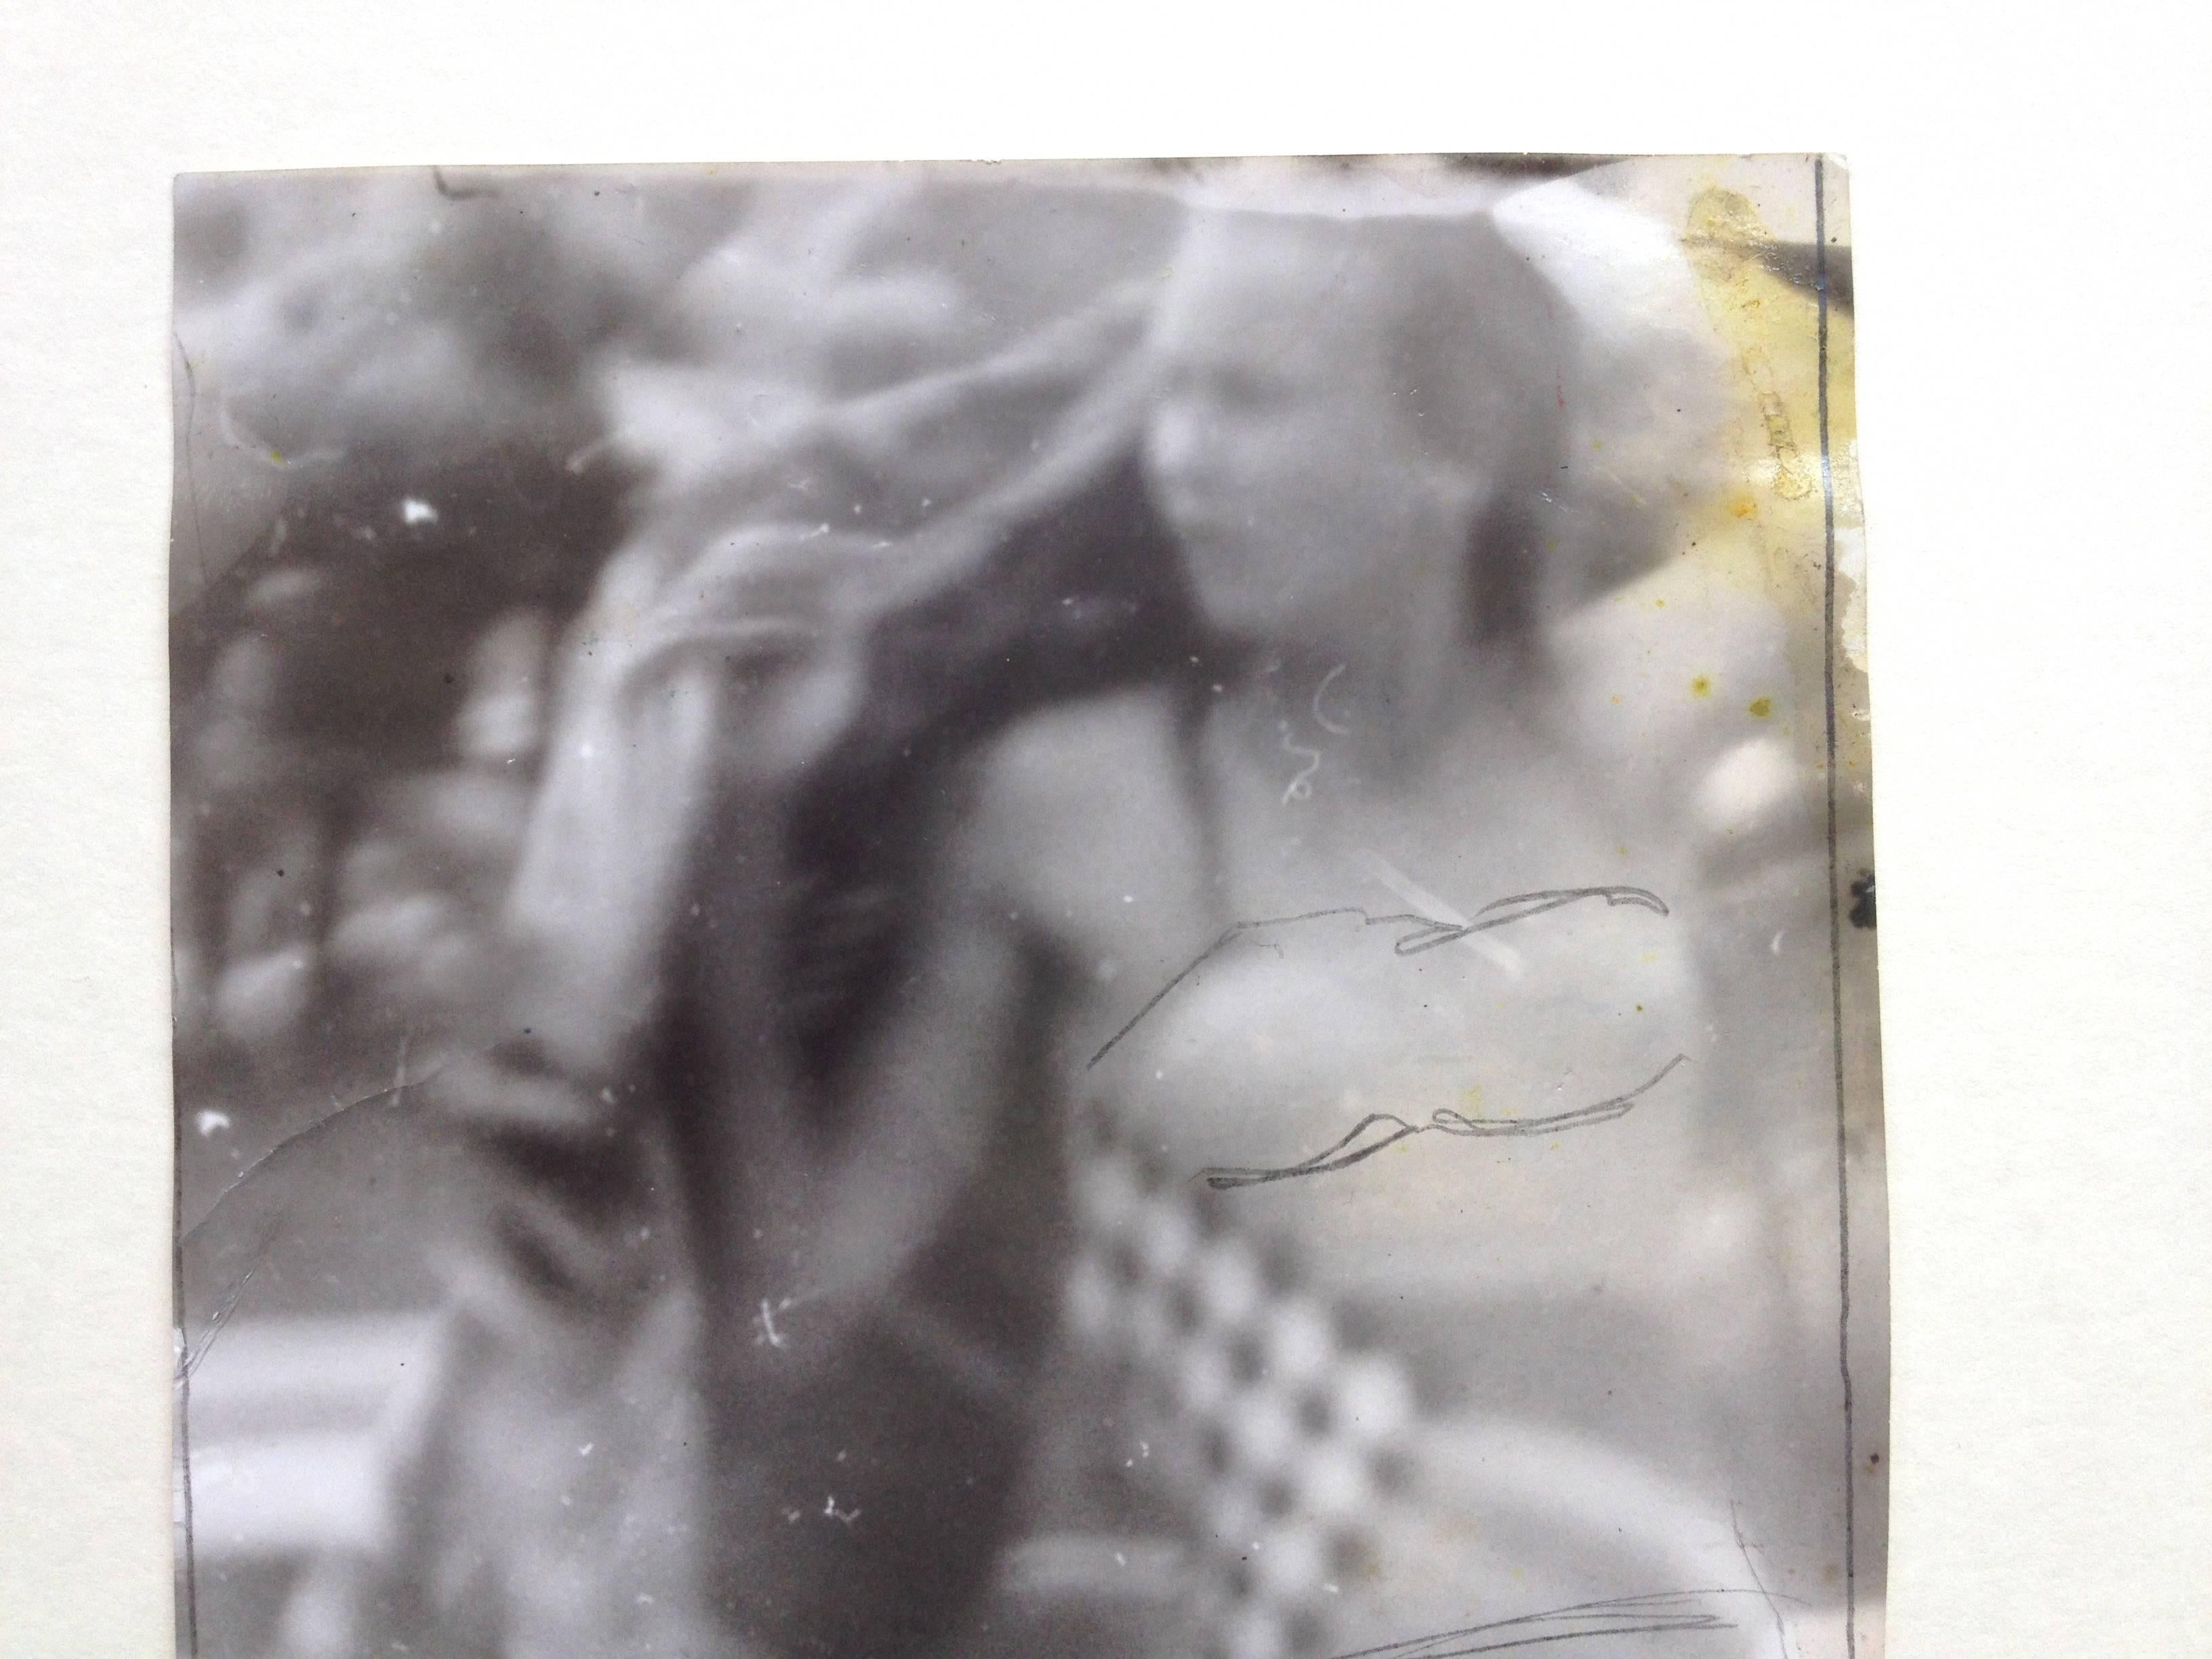 Original Miroslav Tichý b/w Photography. 
Woman in Bikini. 17.5cm x 10.5cm
Unique Vintage Print on paper with the artist's drawing on it.

Miroslav Tichý was a photographer who from the 1960s until 1985 took thousands of surreptitious pictures of